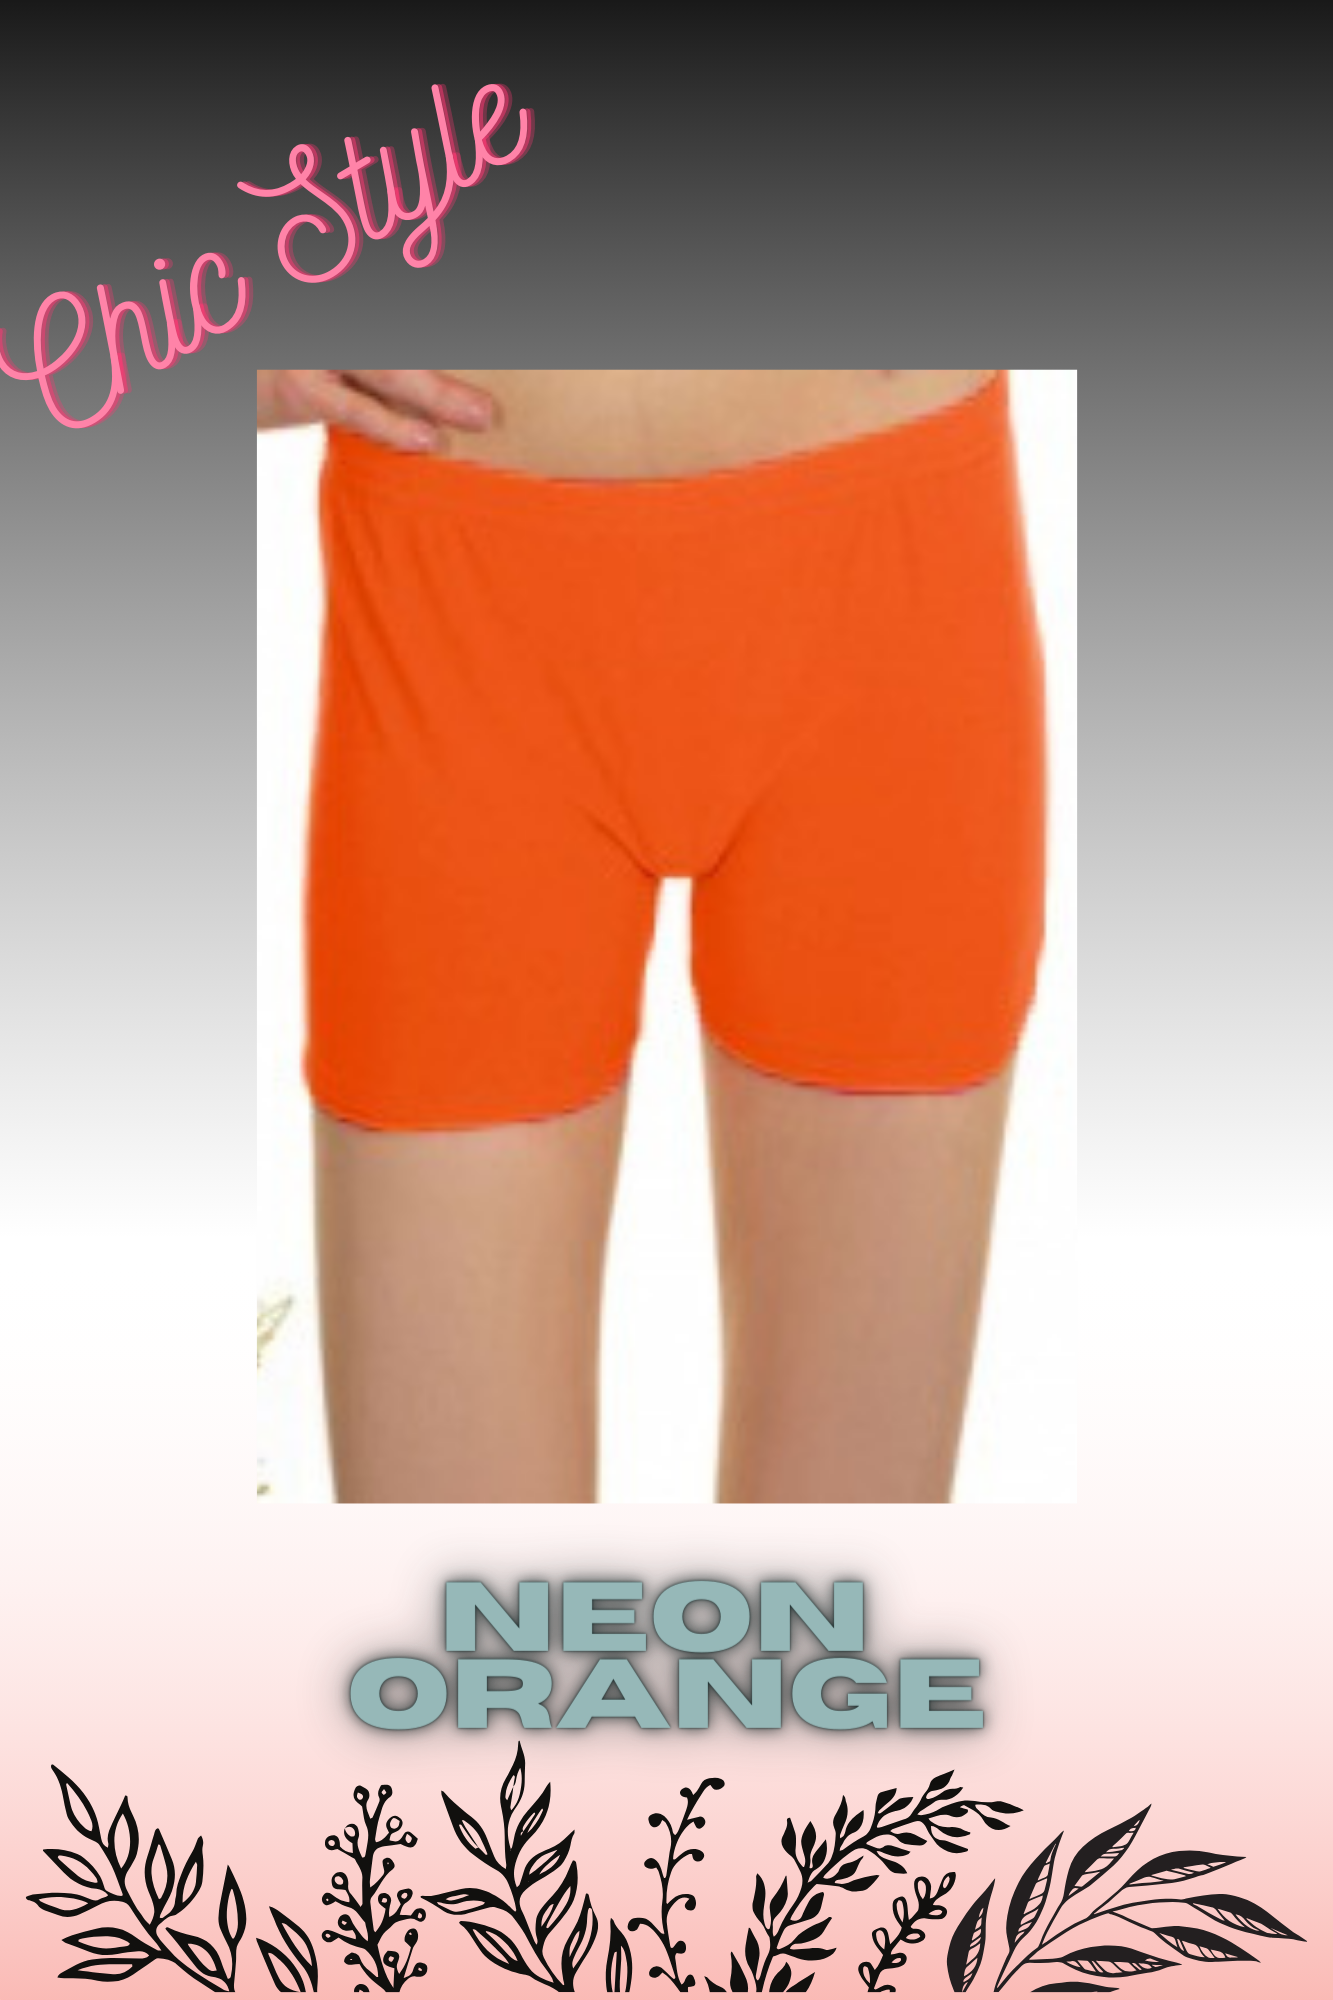 Girls Microfiber Hot Pants - Trendy and Comfortable Summer Style